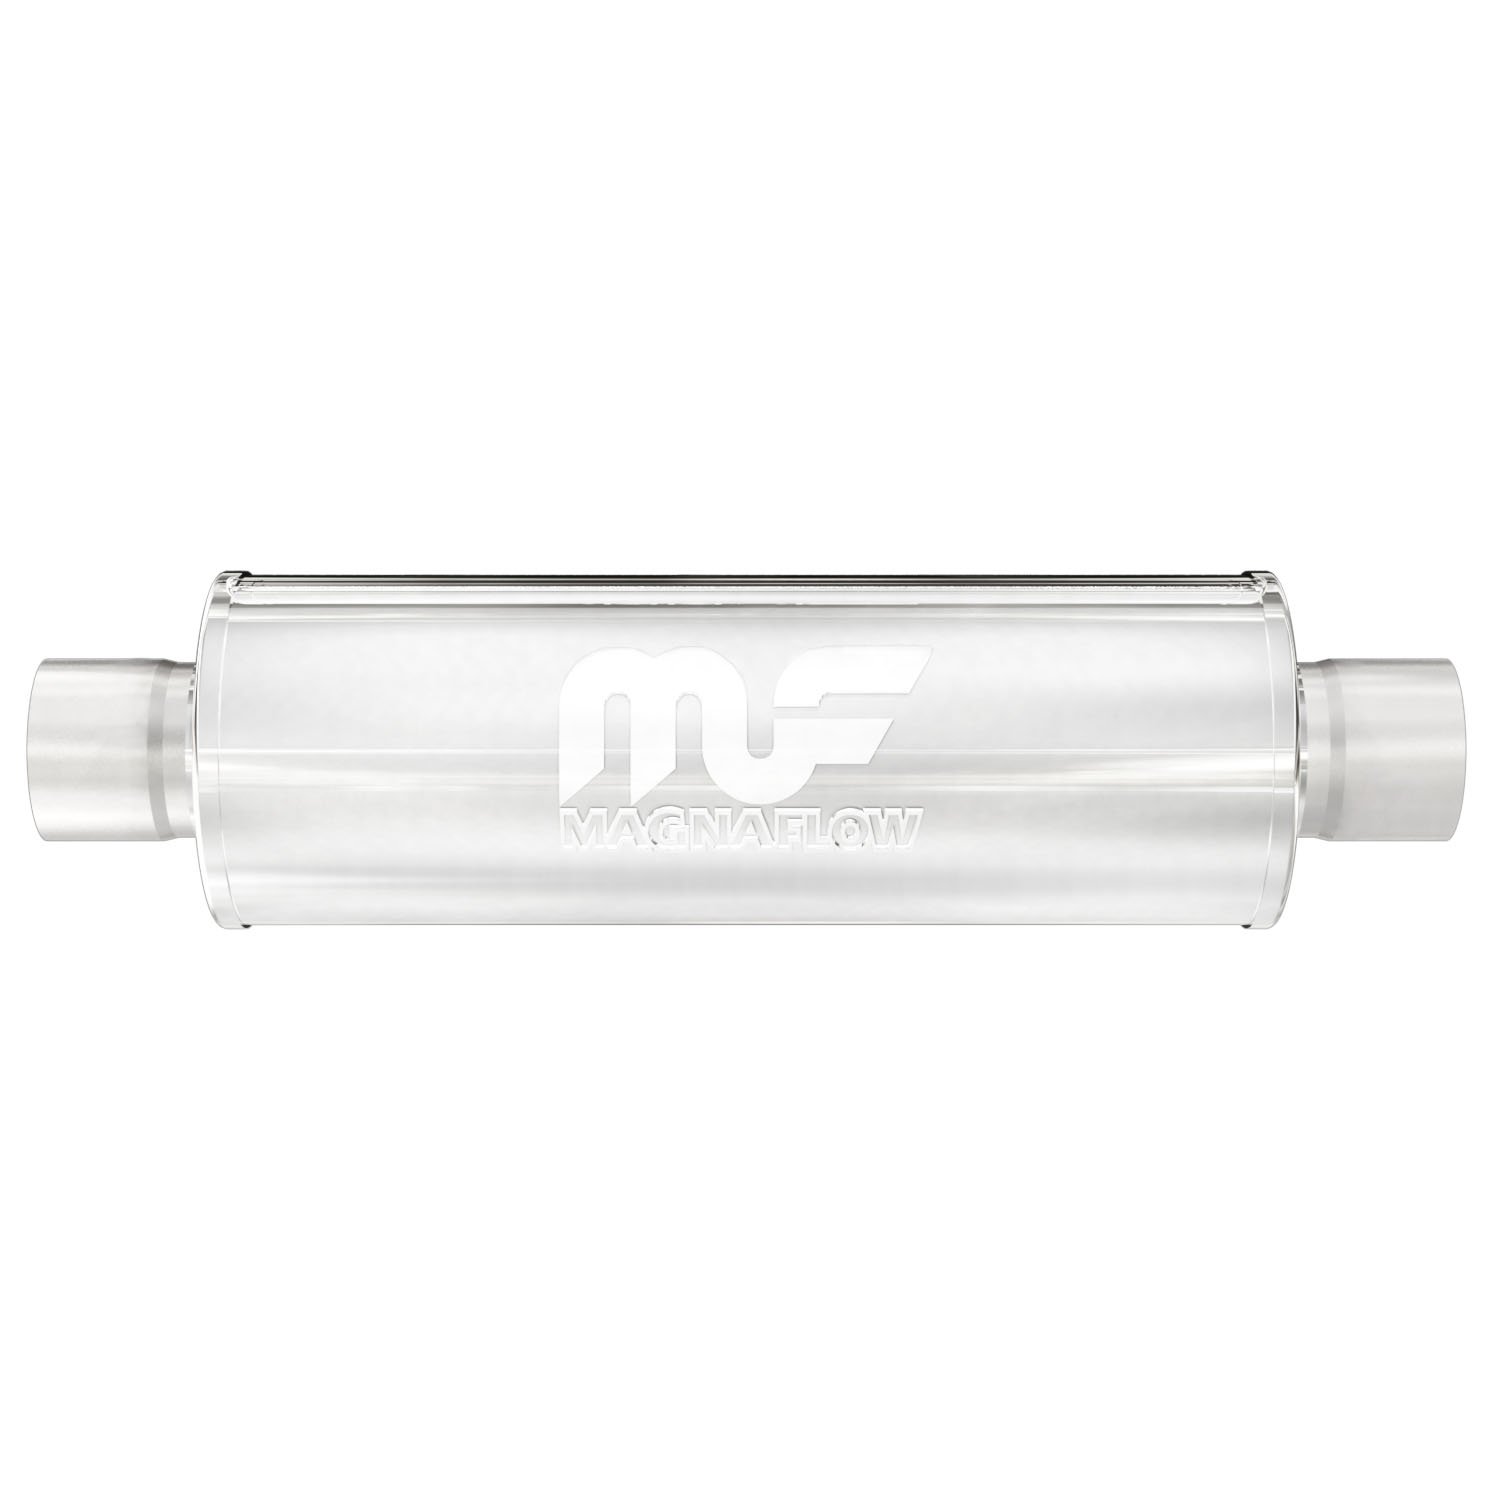 6" Round Muffler Center In/Center Out: 3" Body Length: 14" Overall Length: 20" Core Size: 3" Polished Finish